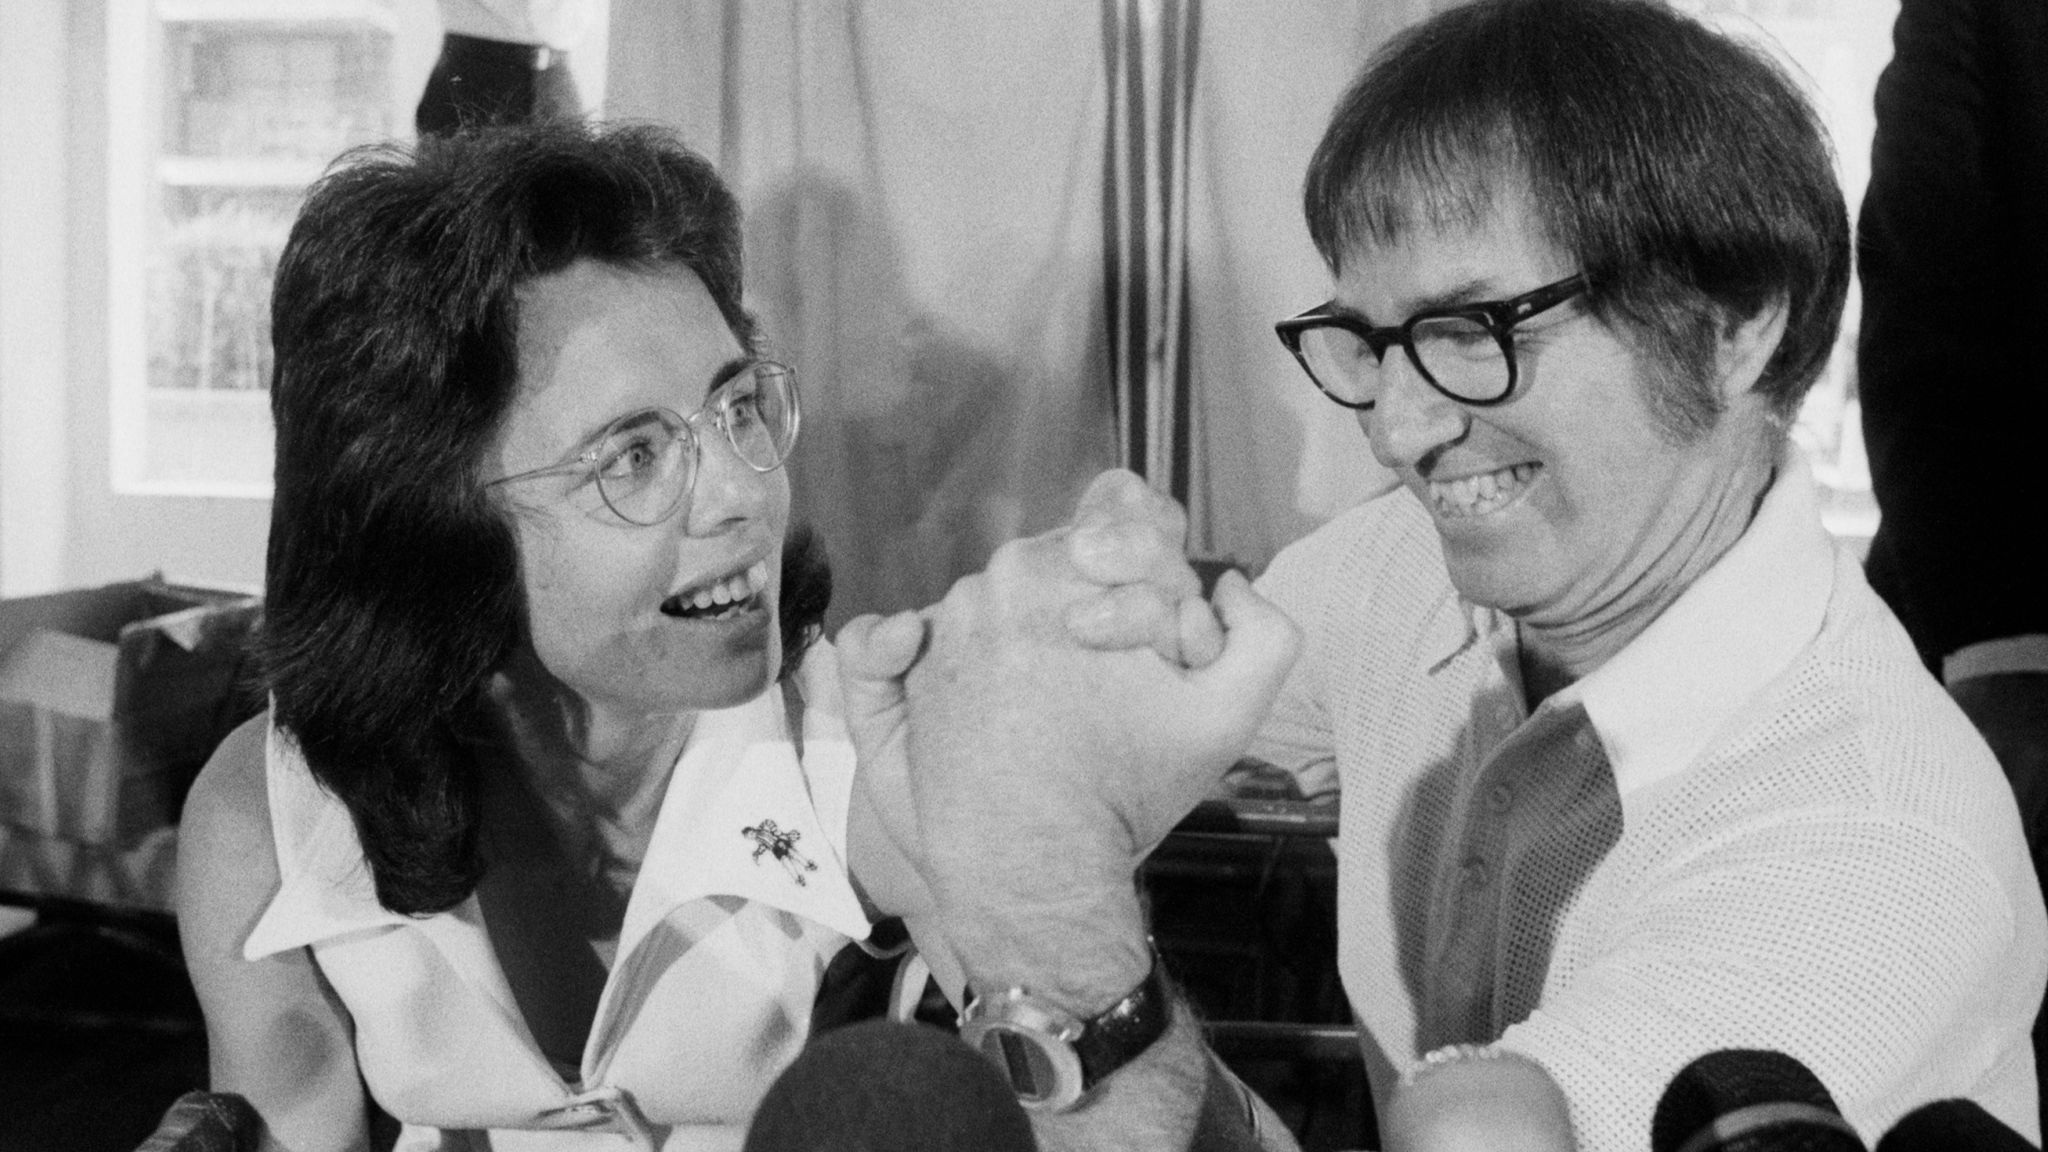 Why The “Battle of the Sexes” Was About More Than Tennis